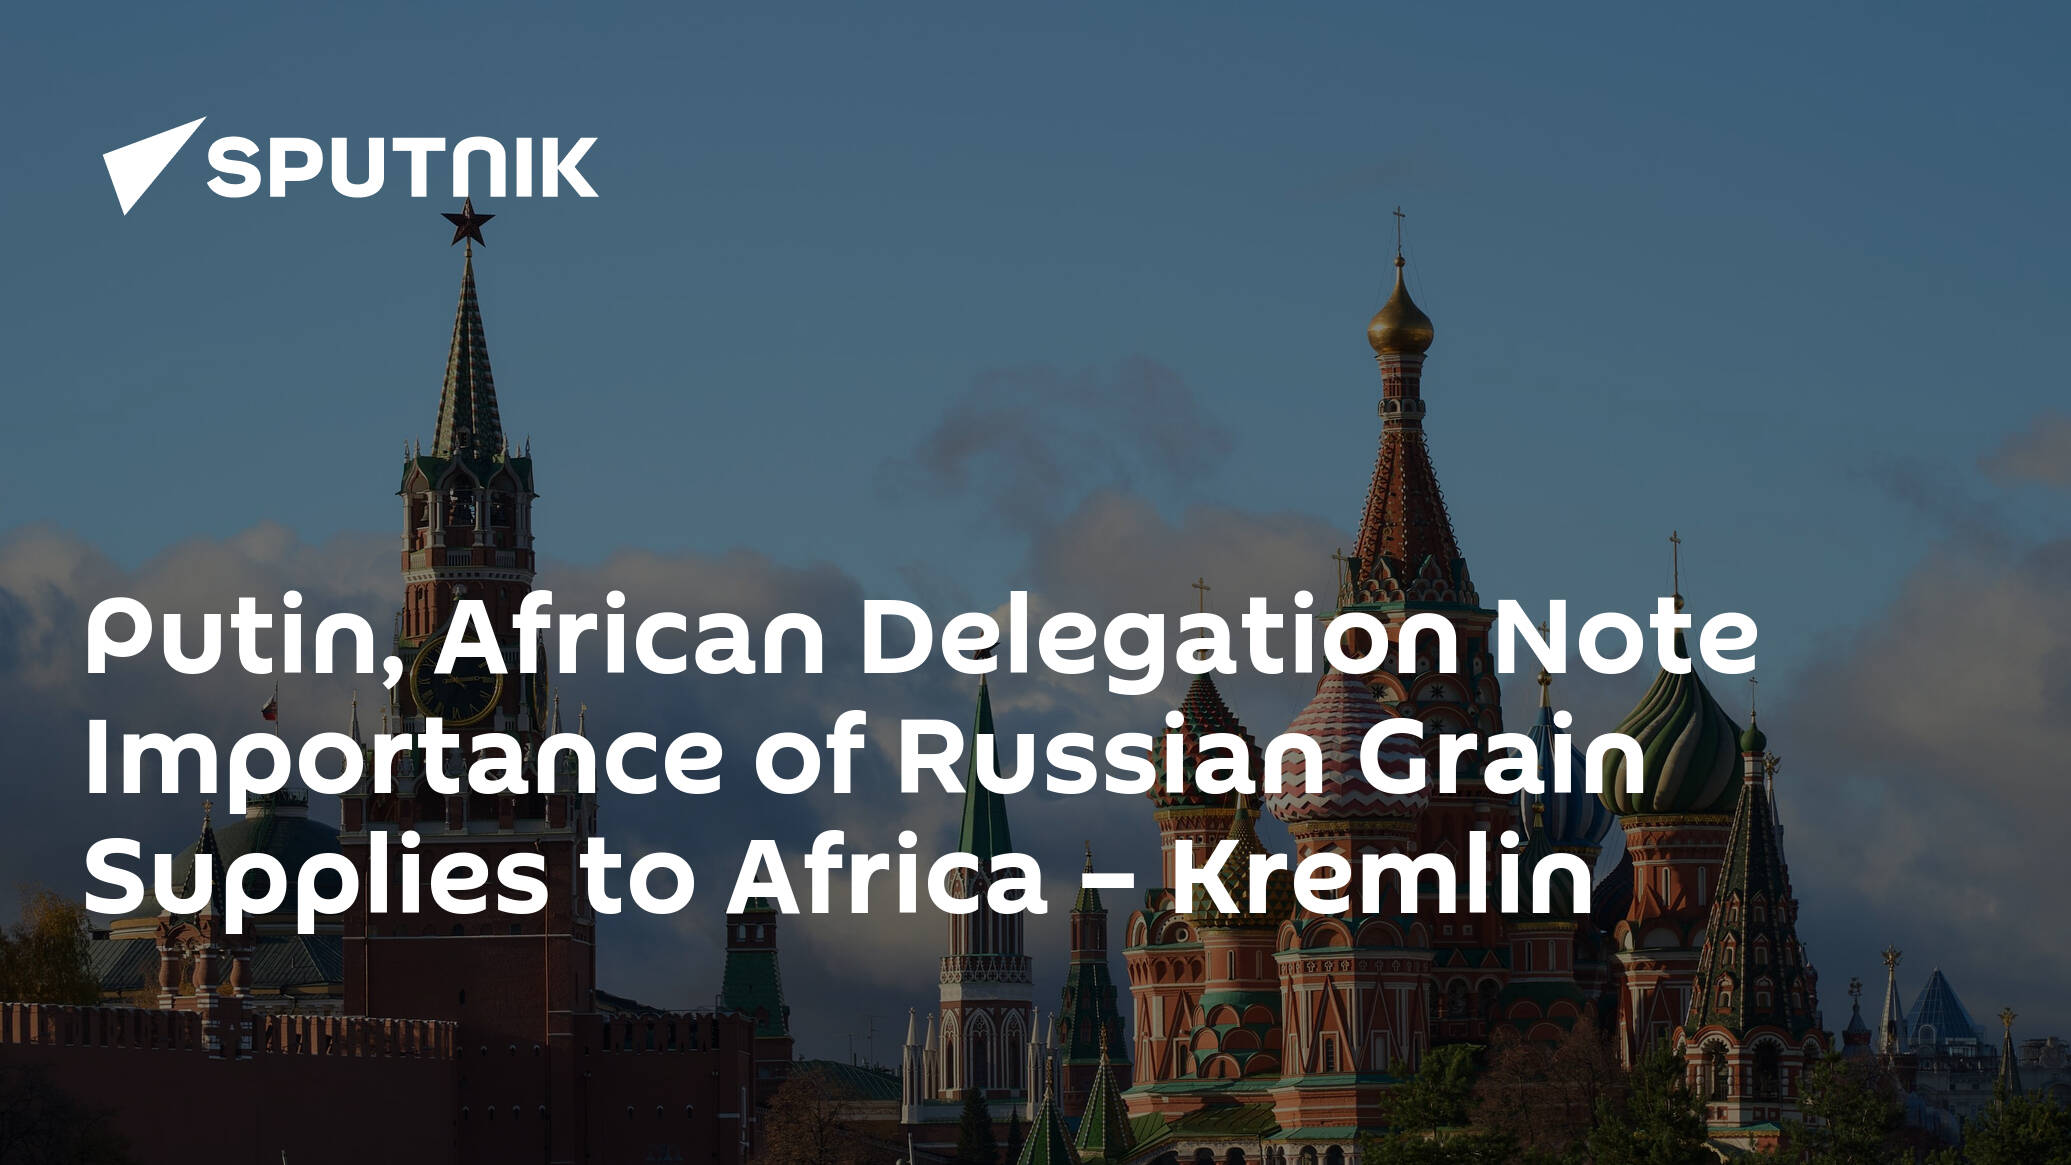 Putin, African Delegation Note Importance of Russian Grain Supplies to Africa – Kremlin